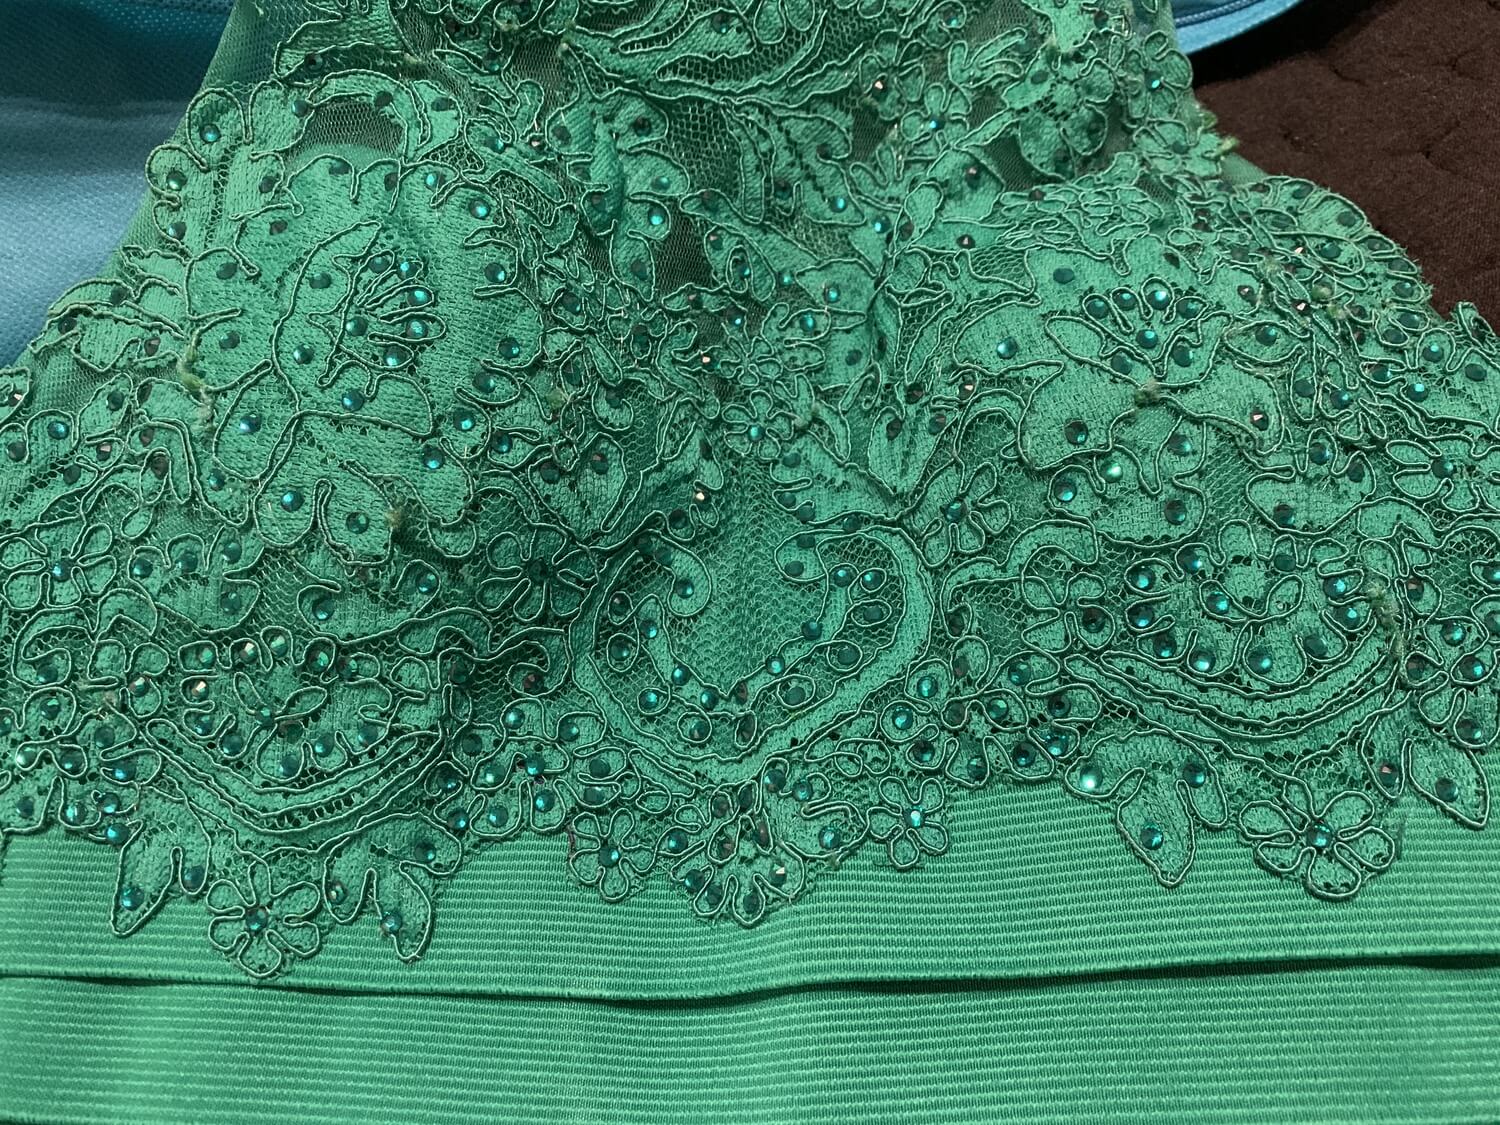 Sherri Hill Size 2 Homecoming Lace Emerald Green Cocktail Dress on Queenly